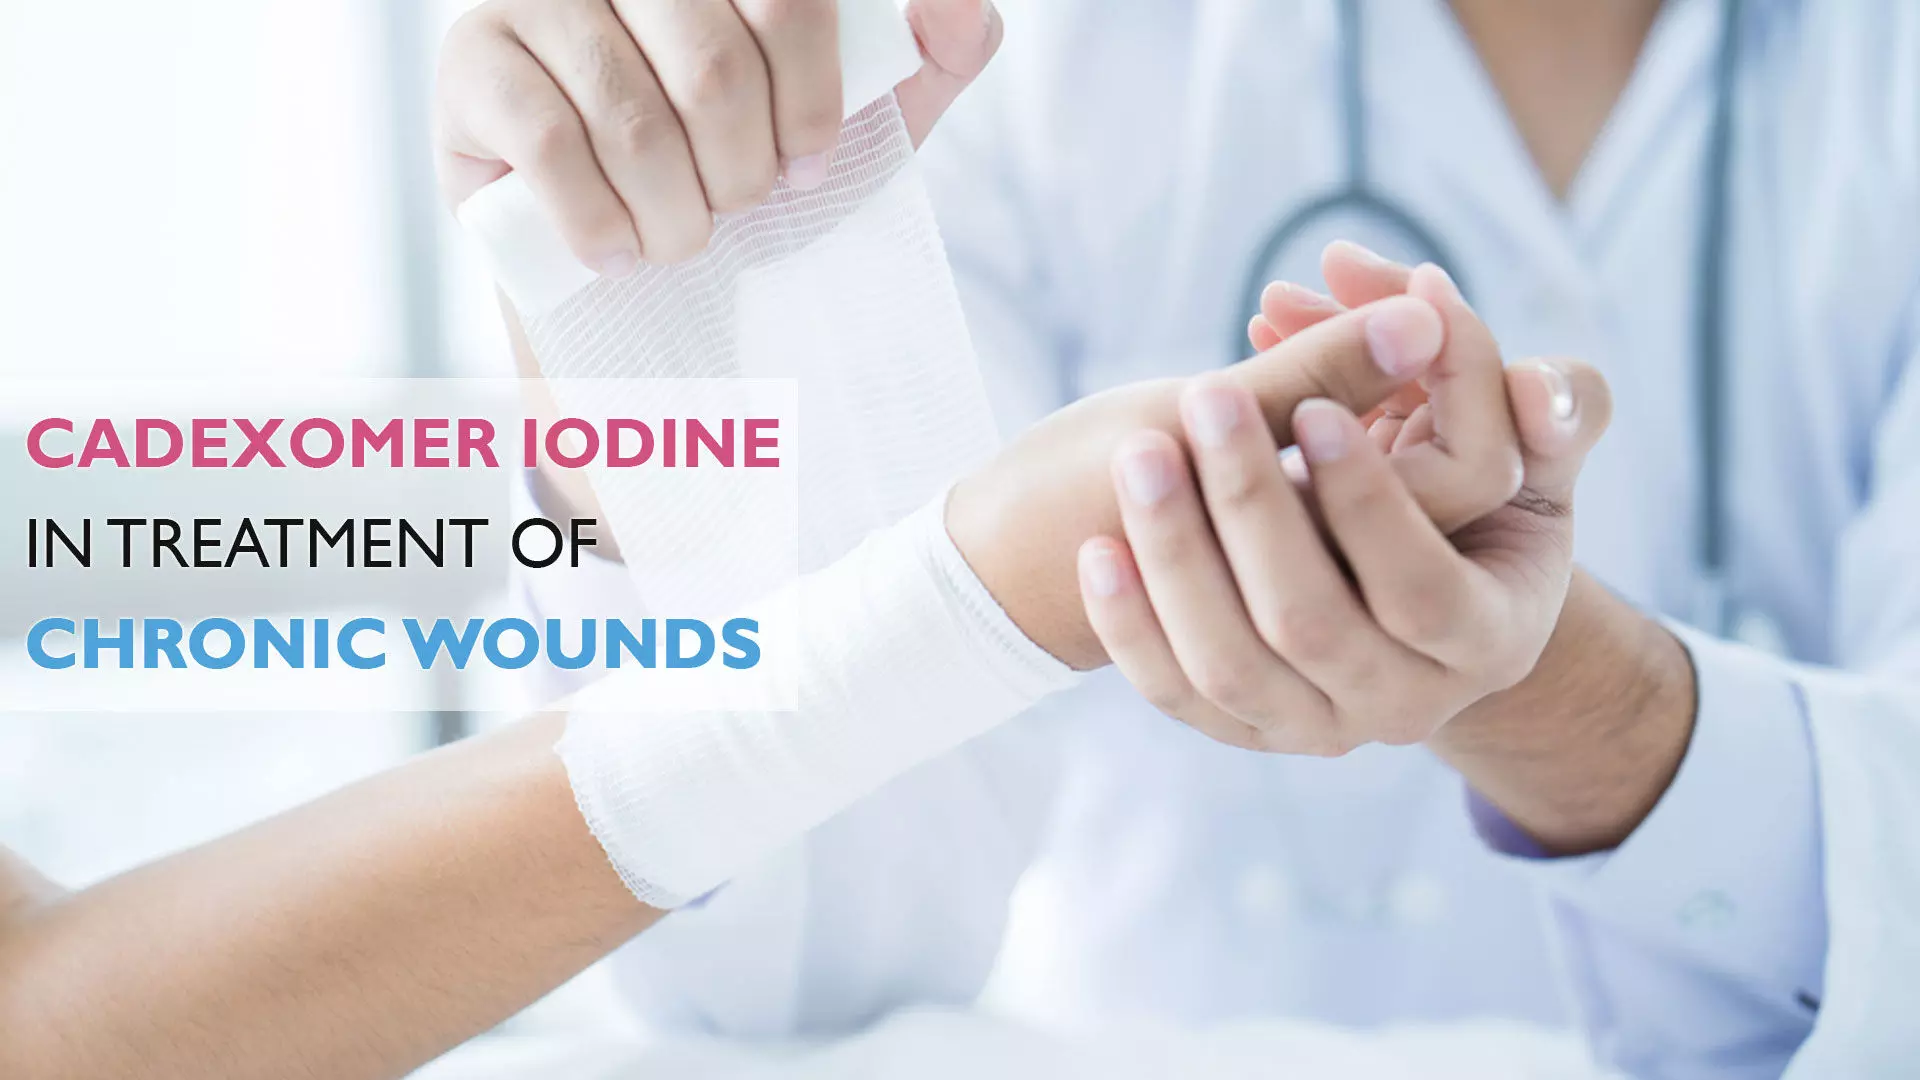 Role of Cadexomer Iodine in wound bed preparation for healing of Chronic Wounds: Meta-Analysis